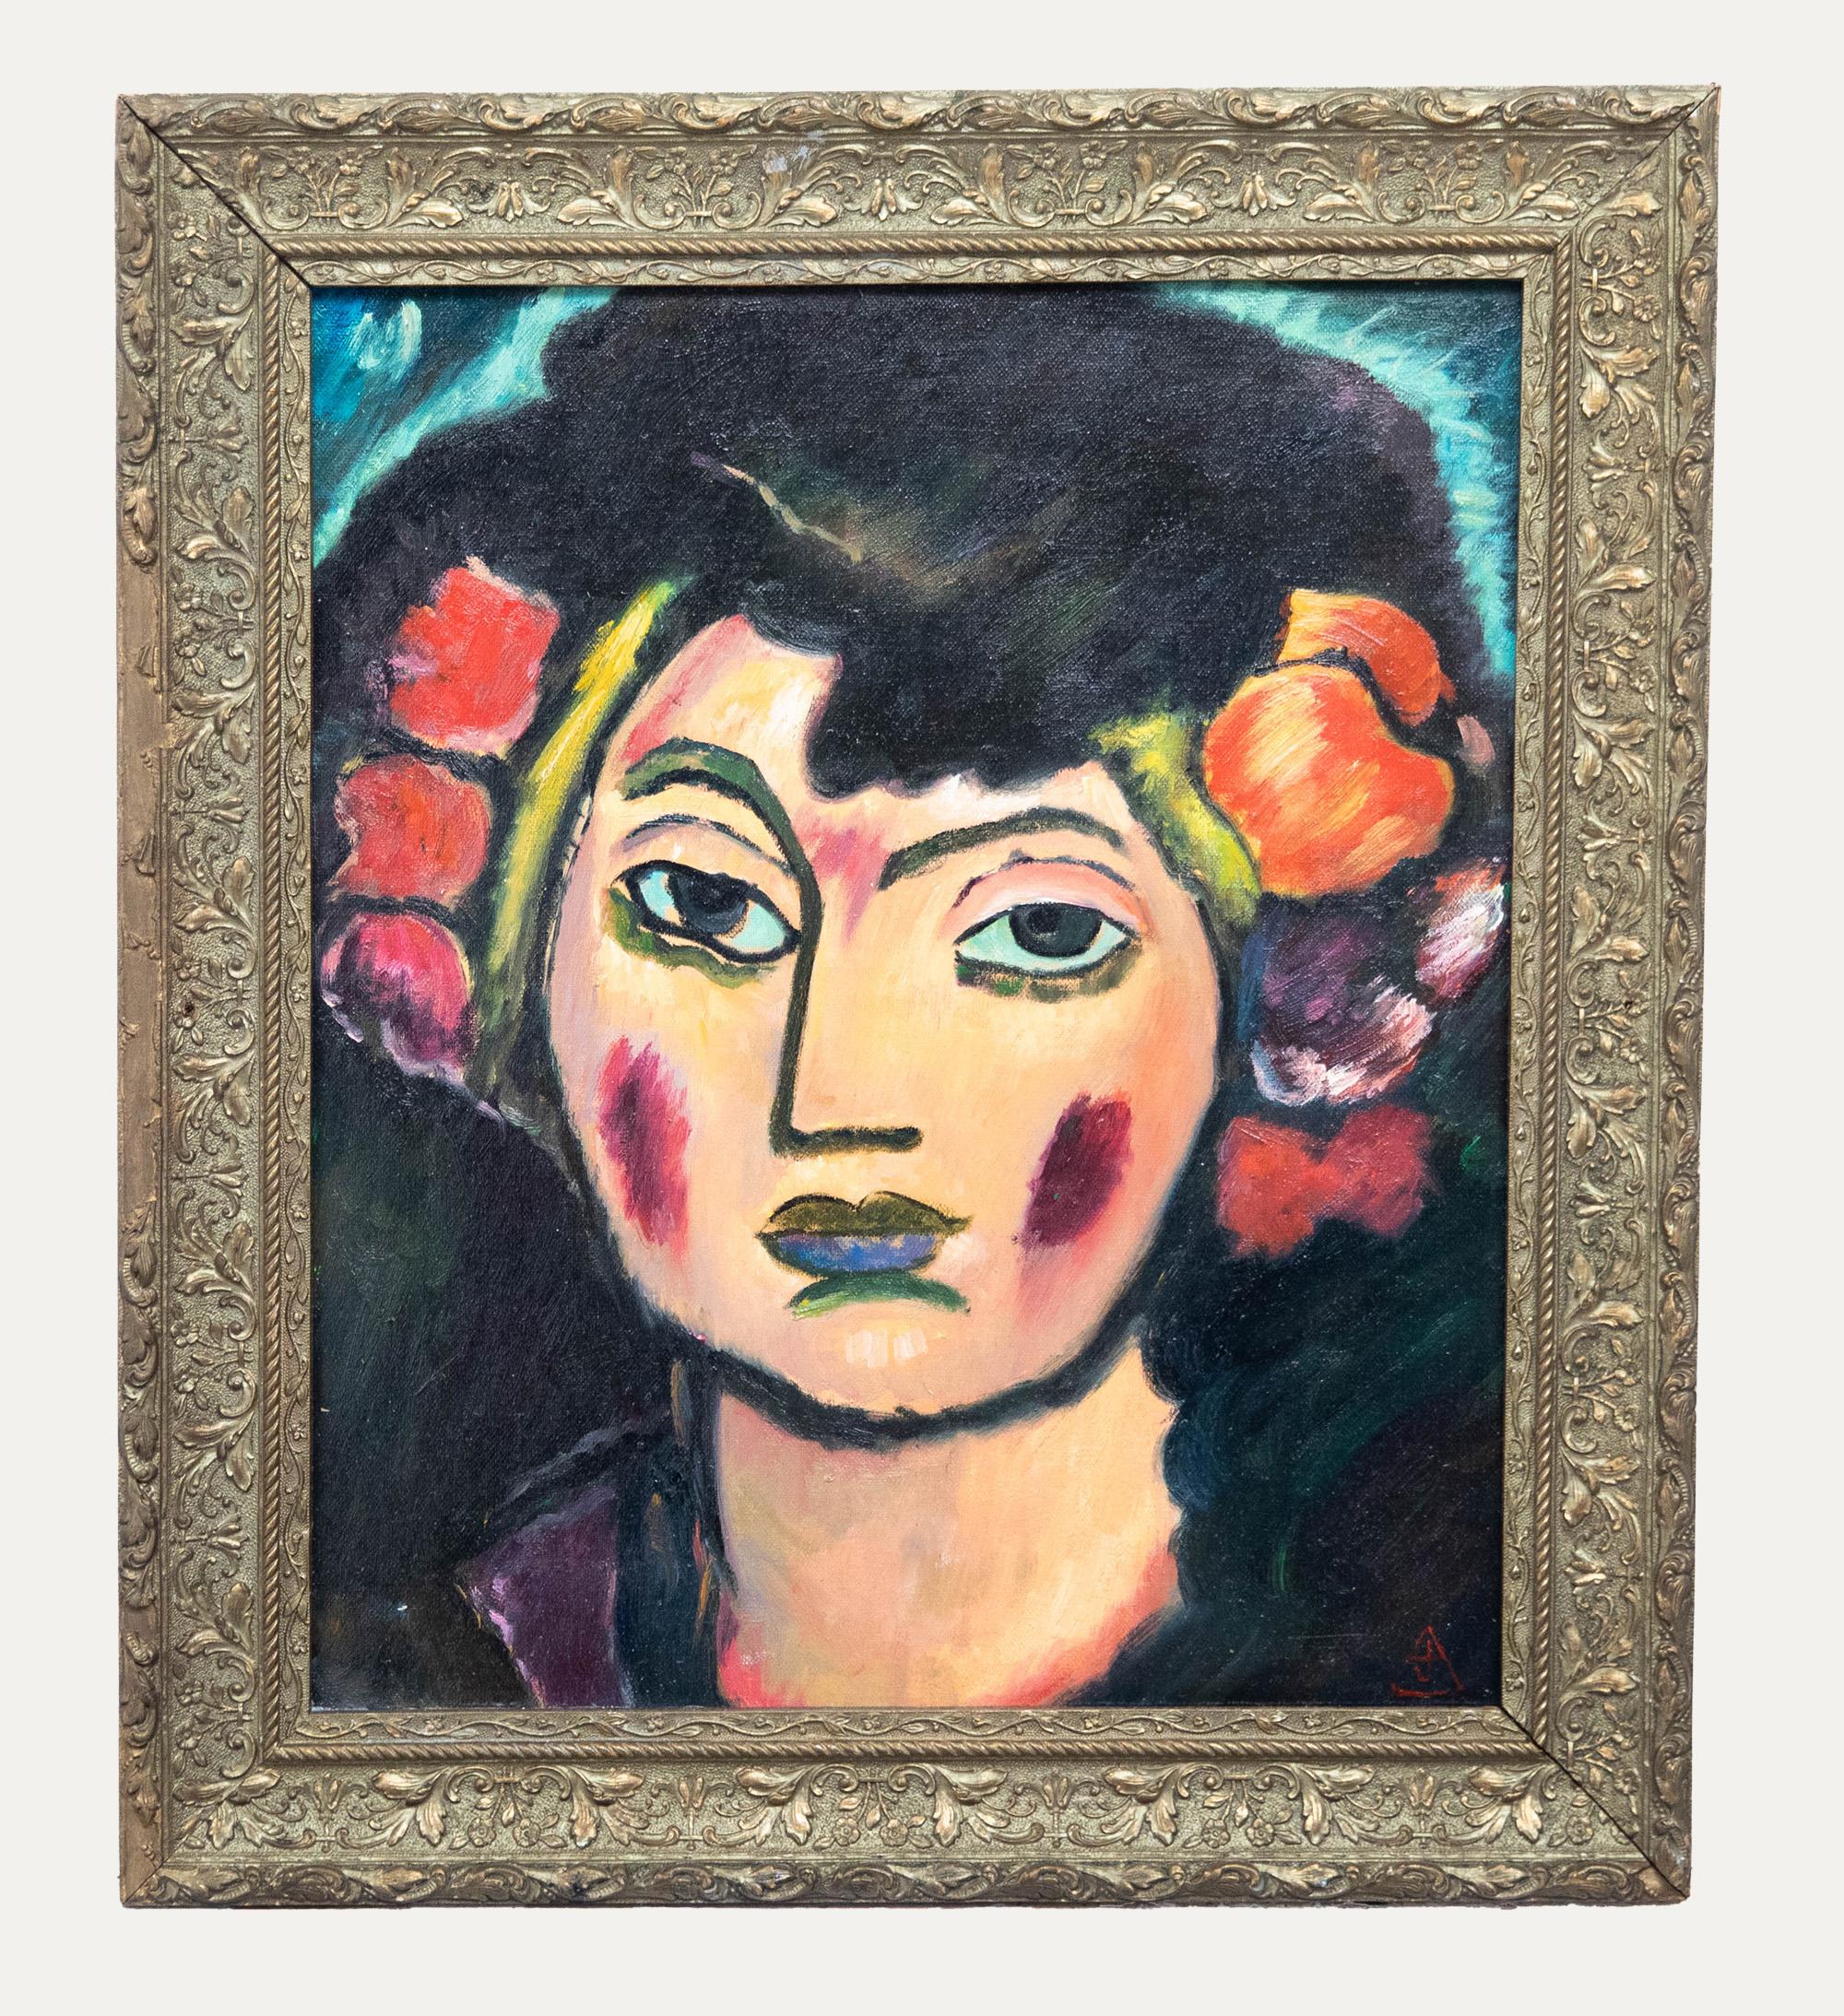 Unknown Portrait Painting - 20th Century Oil - Flowers in Her Hair